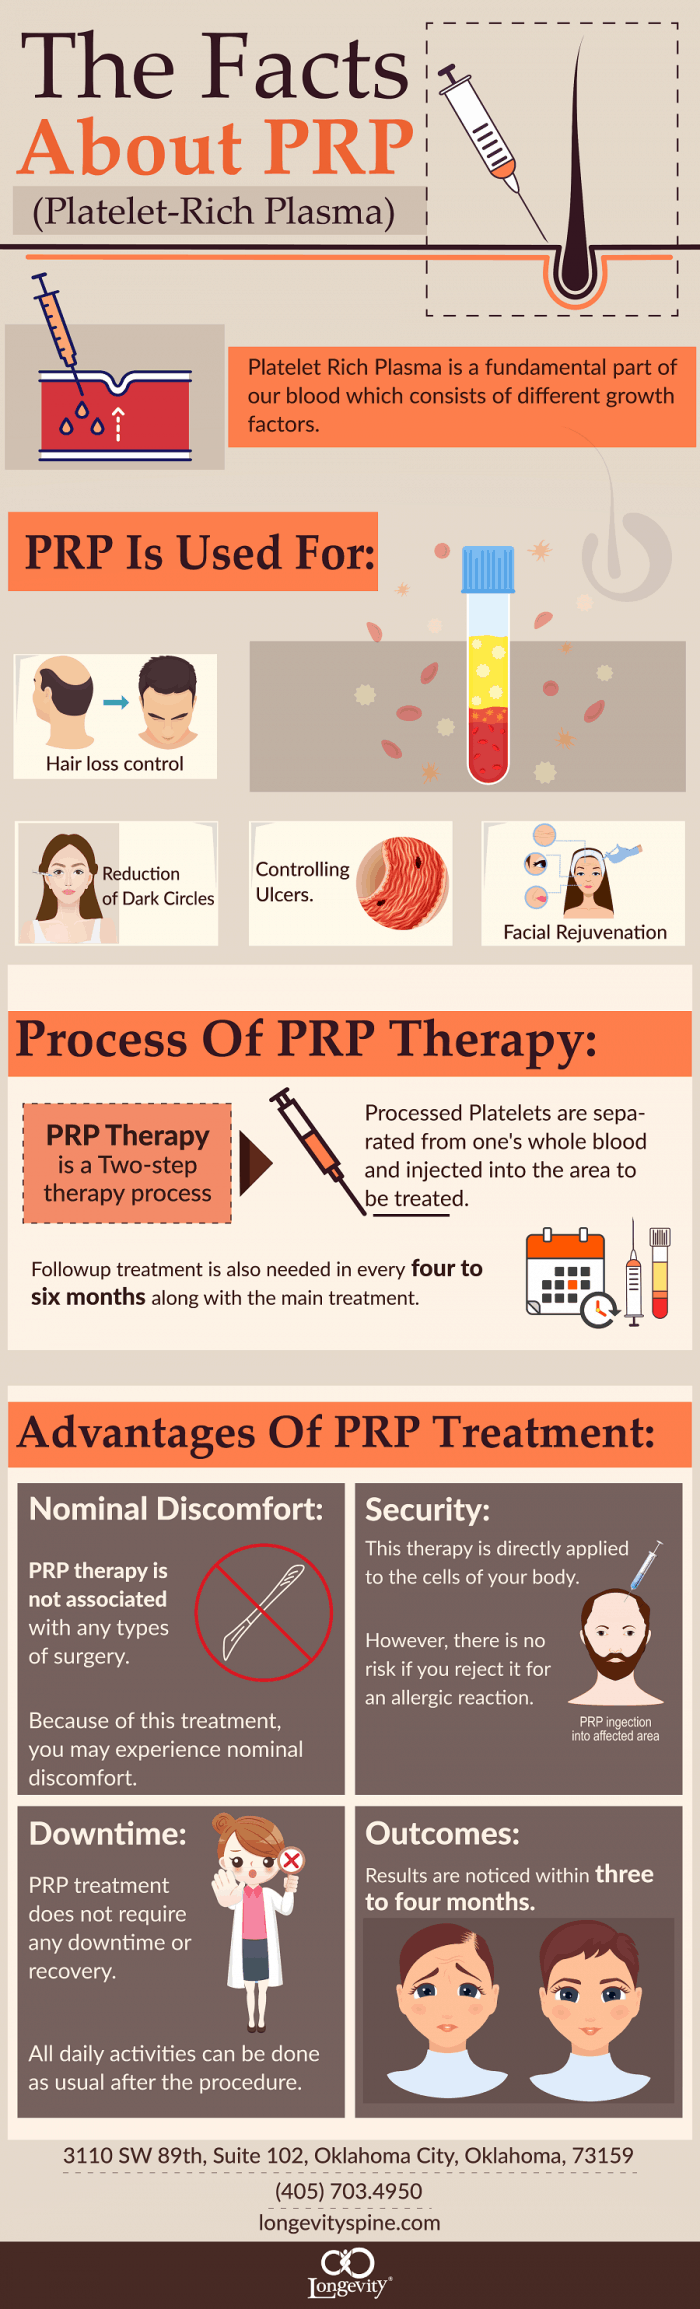 The Facts About PRP